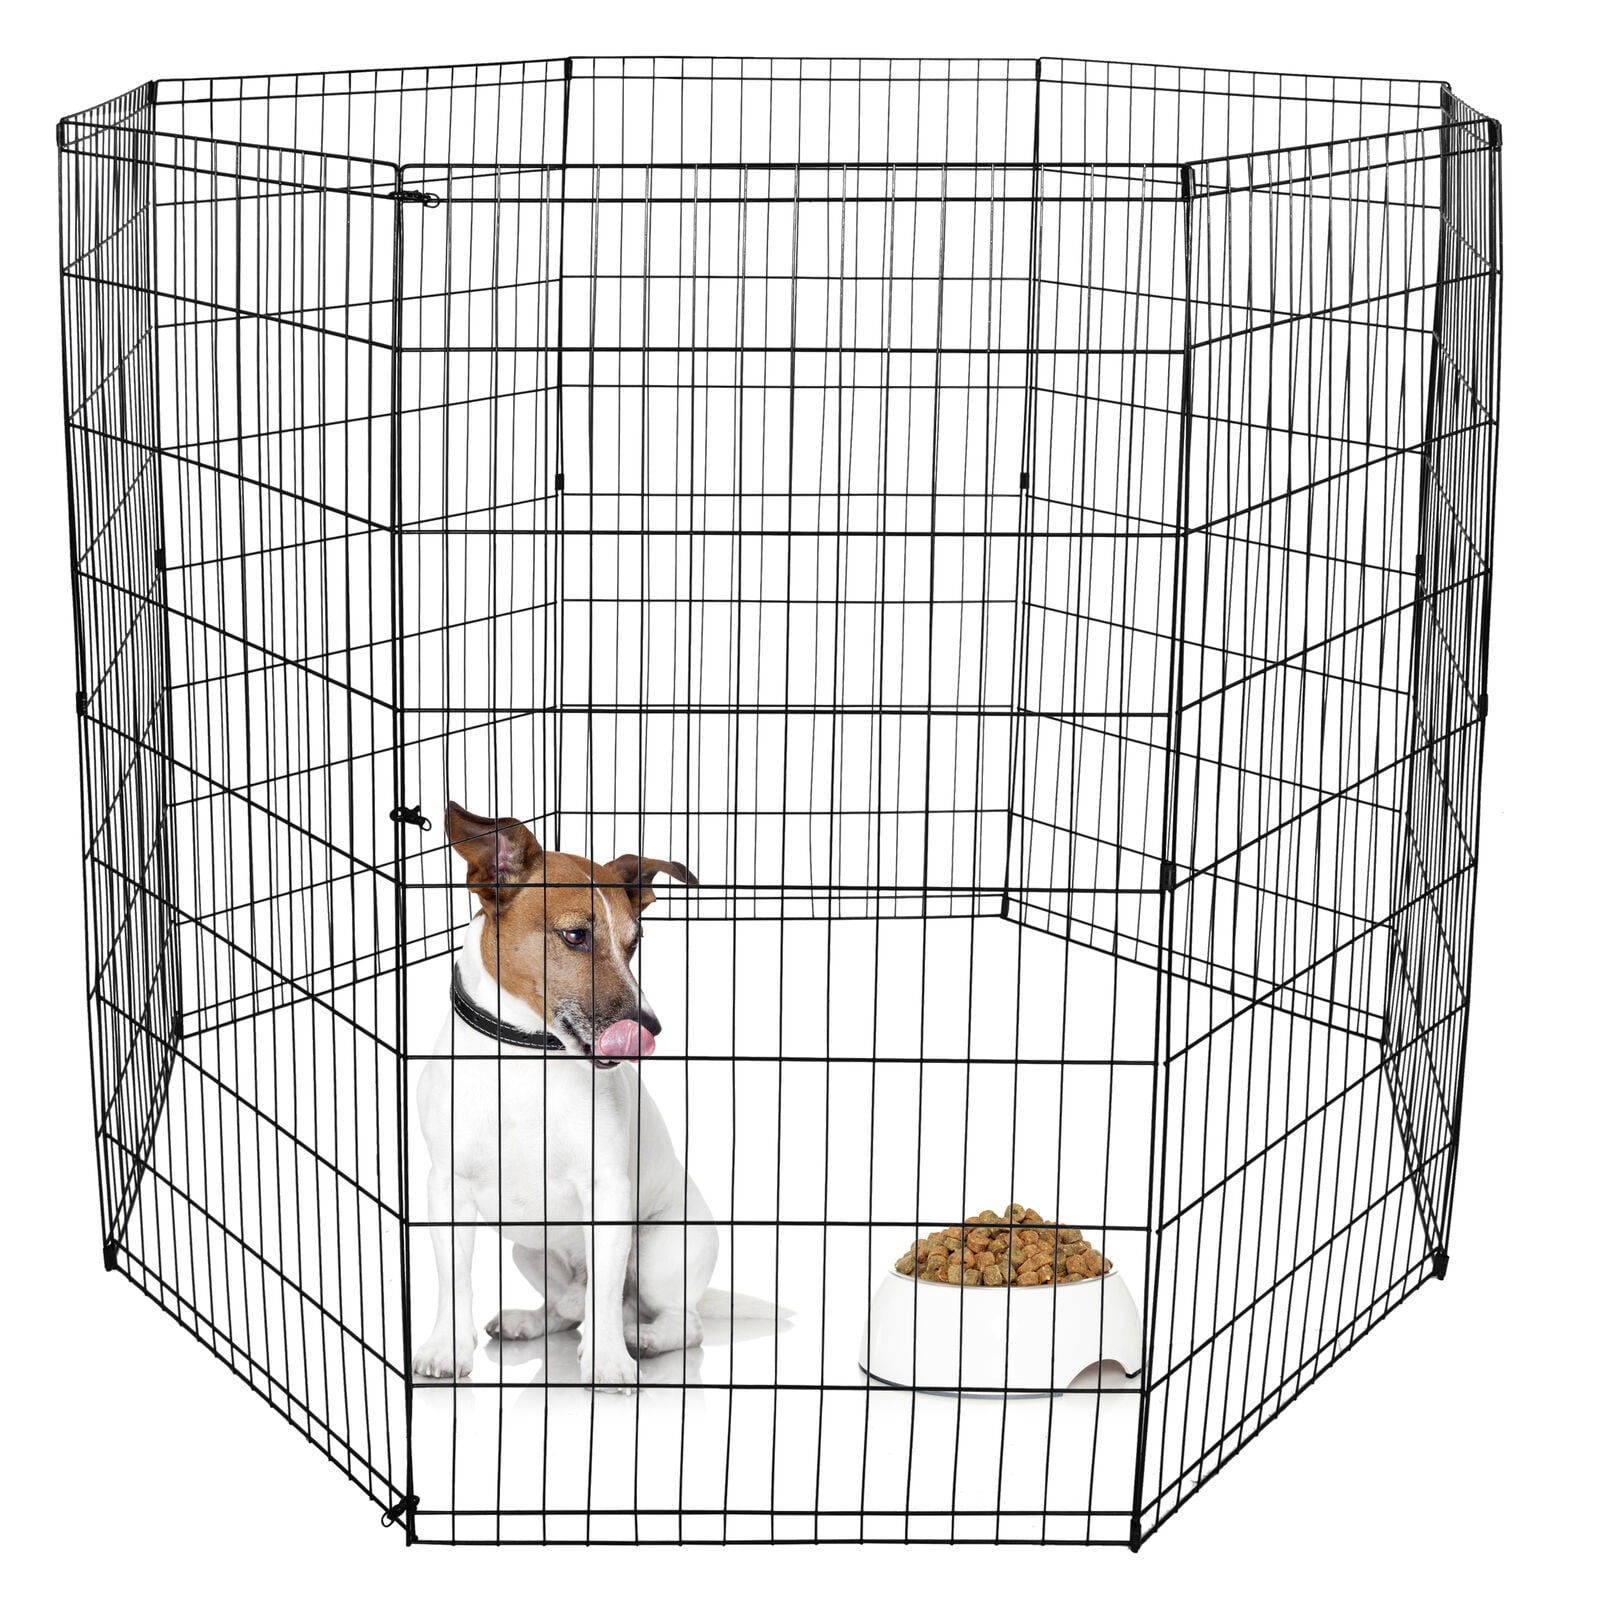 Metal 12 panels Tall Dog Playpen Crate Fence Pet Kennel Play Pen Exercise Cage 